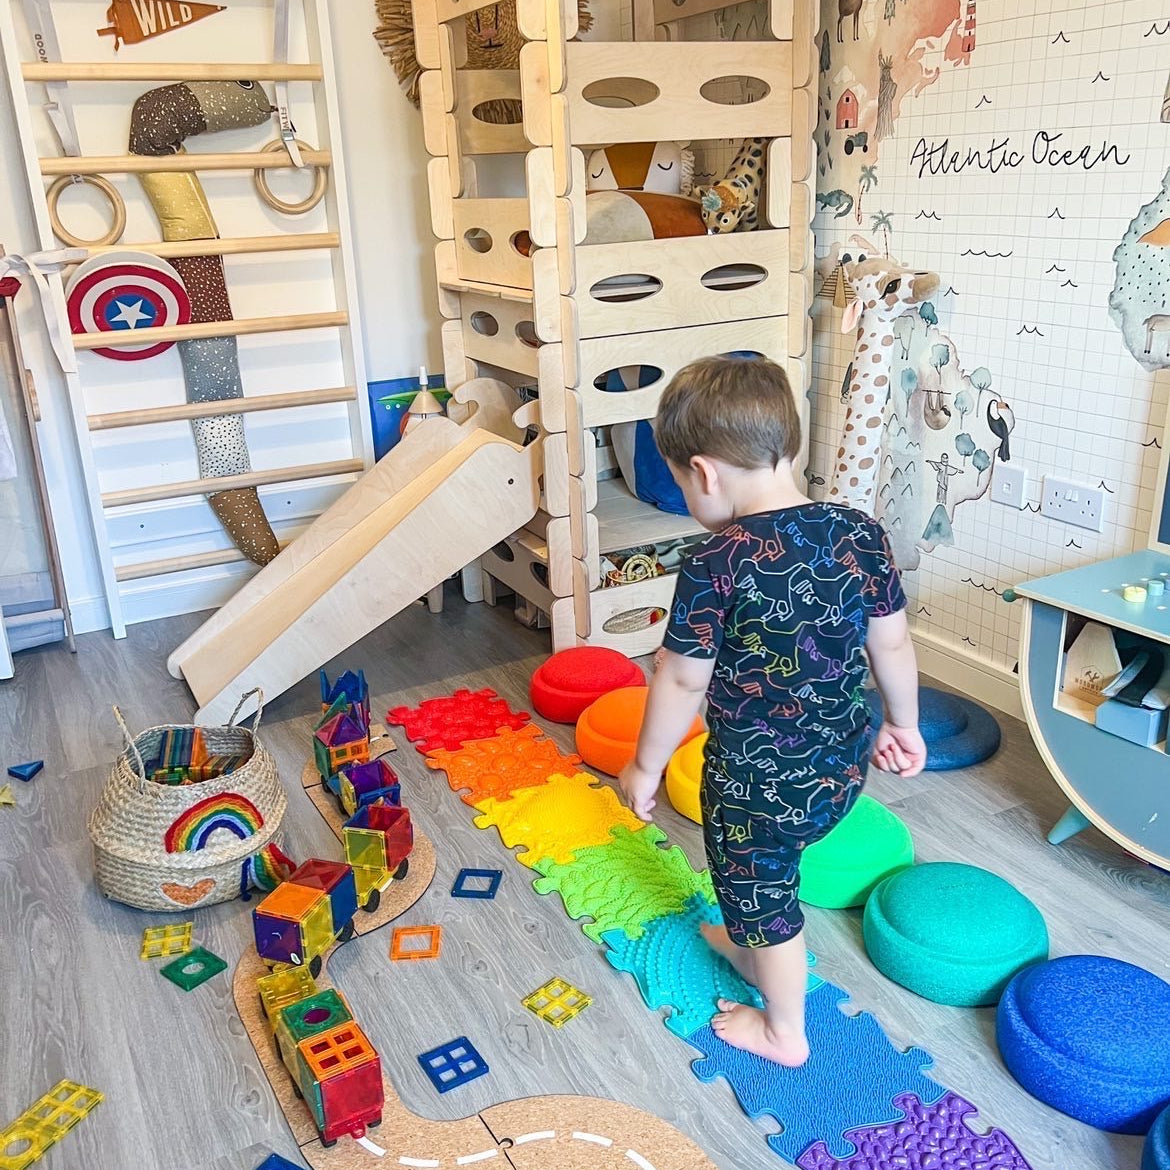 
  
  How sensory play mats can boost motor and cognitive development
  
